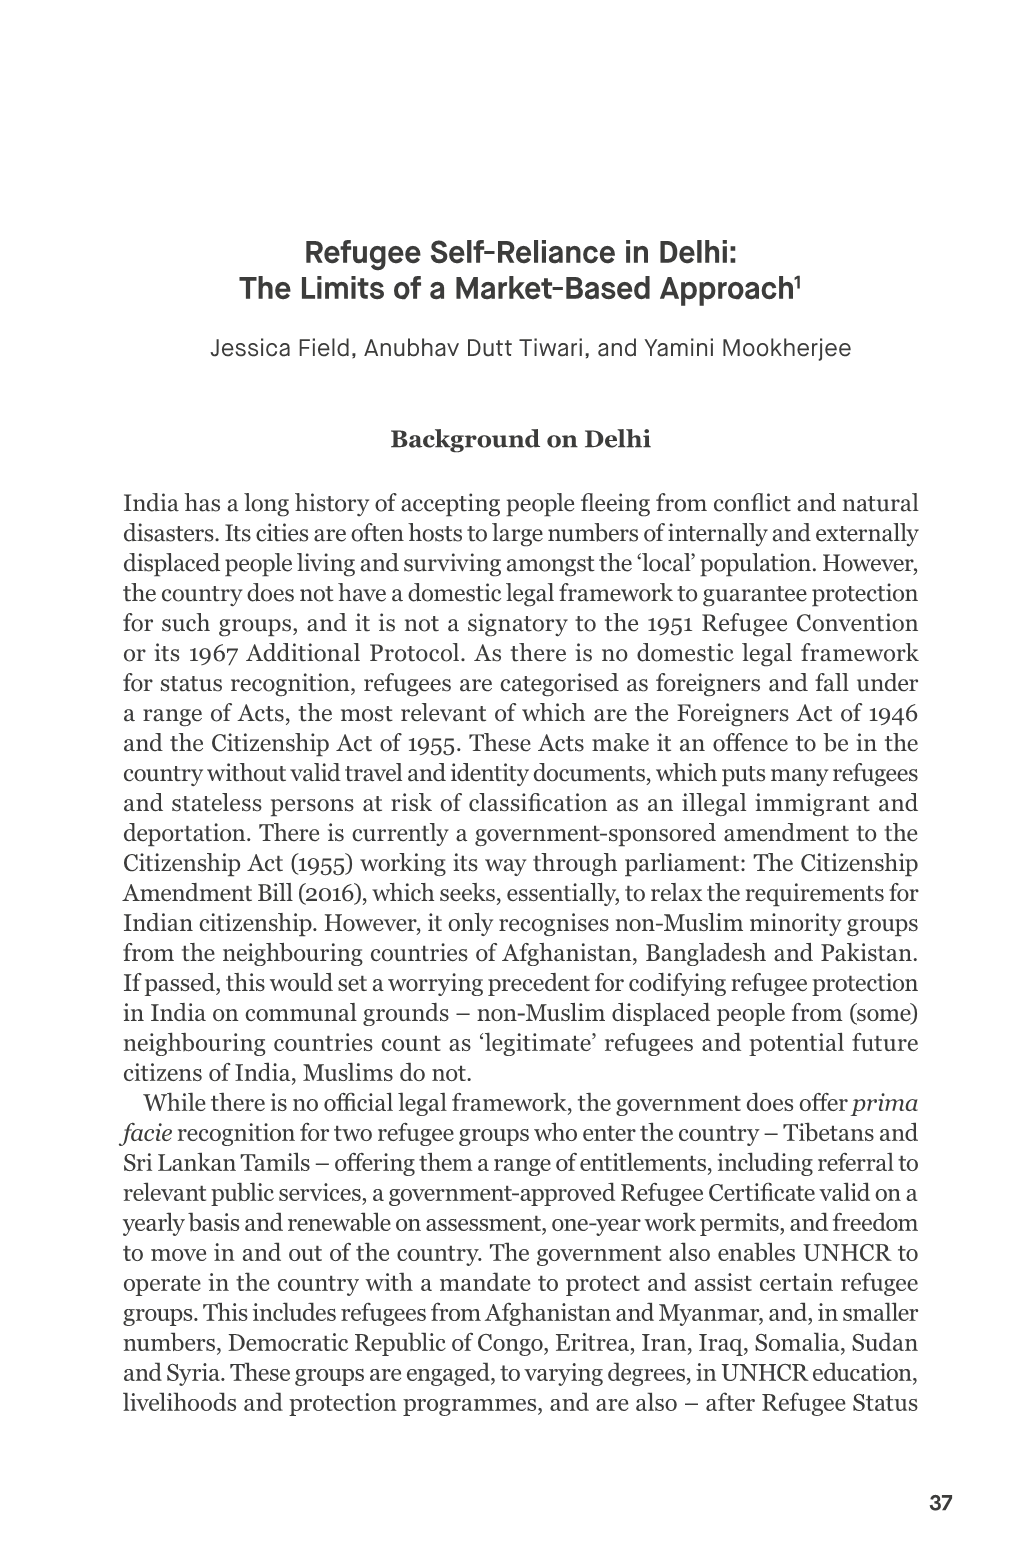 Refugee Self-Reliance in Delhi: the Limits of a Market-Based Approach1